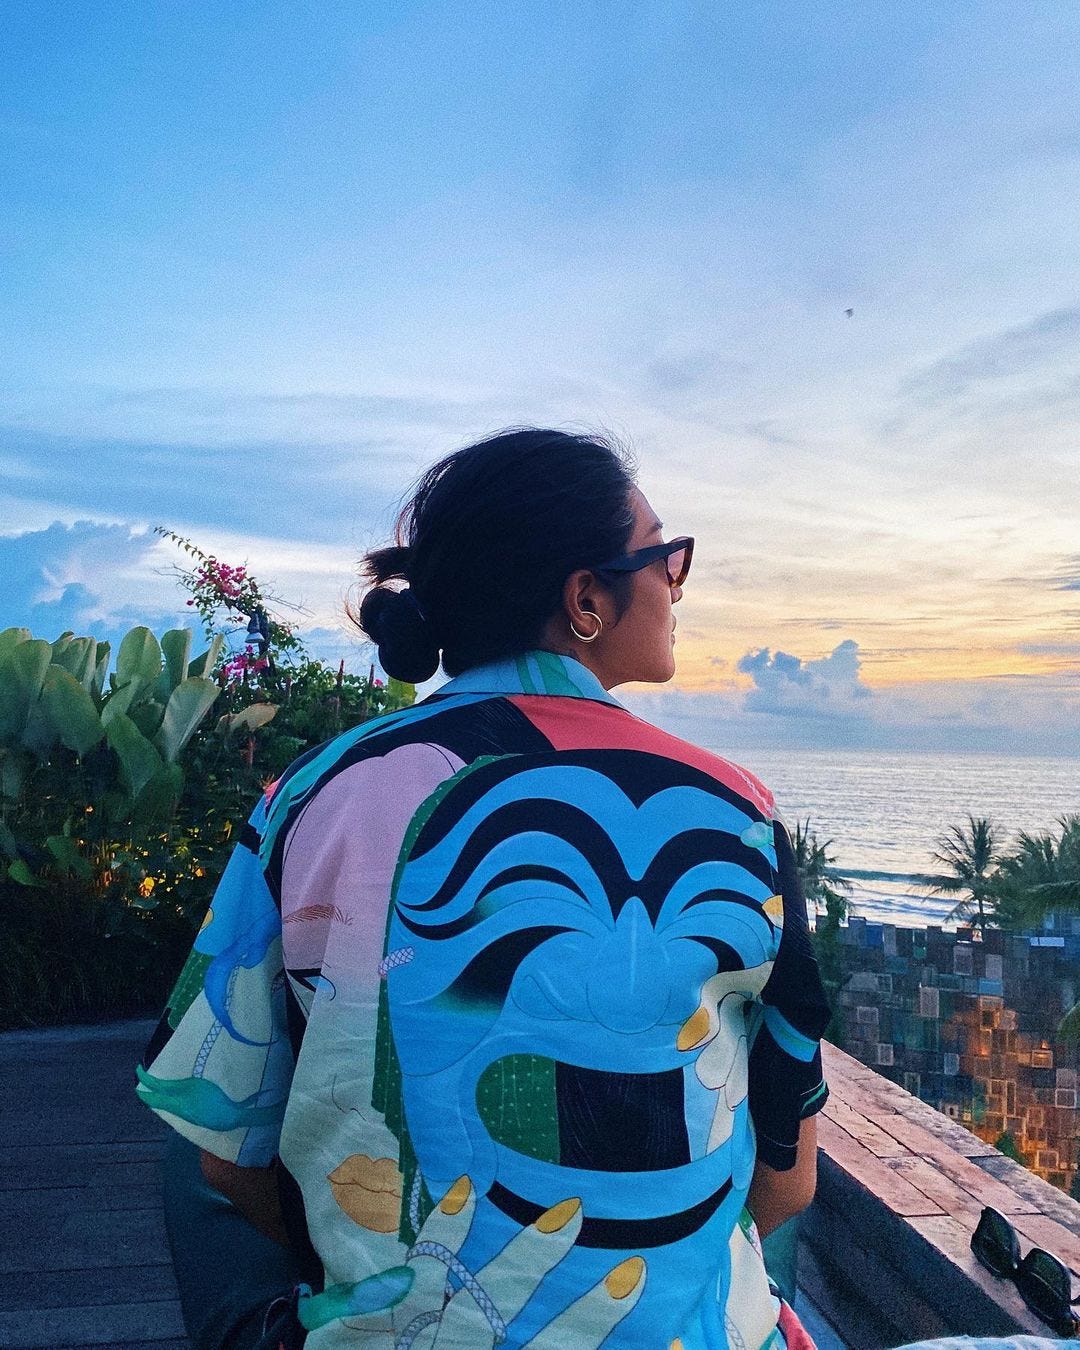 Peggy Gou to launch her own record label and fashion line